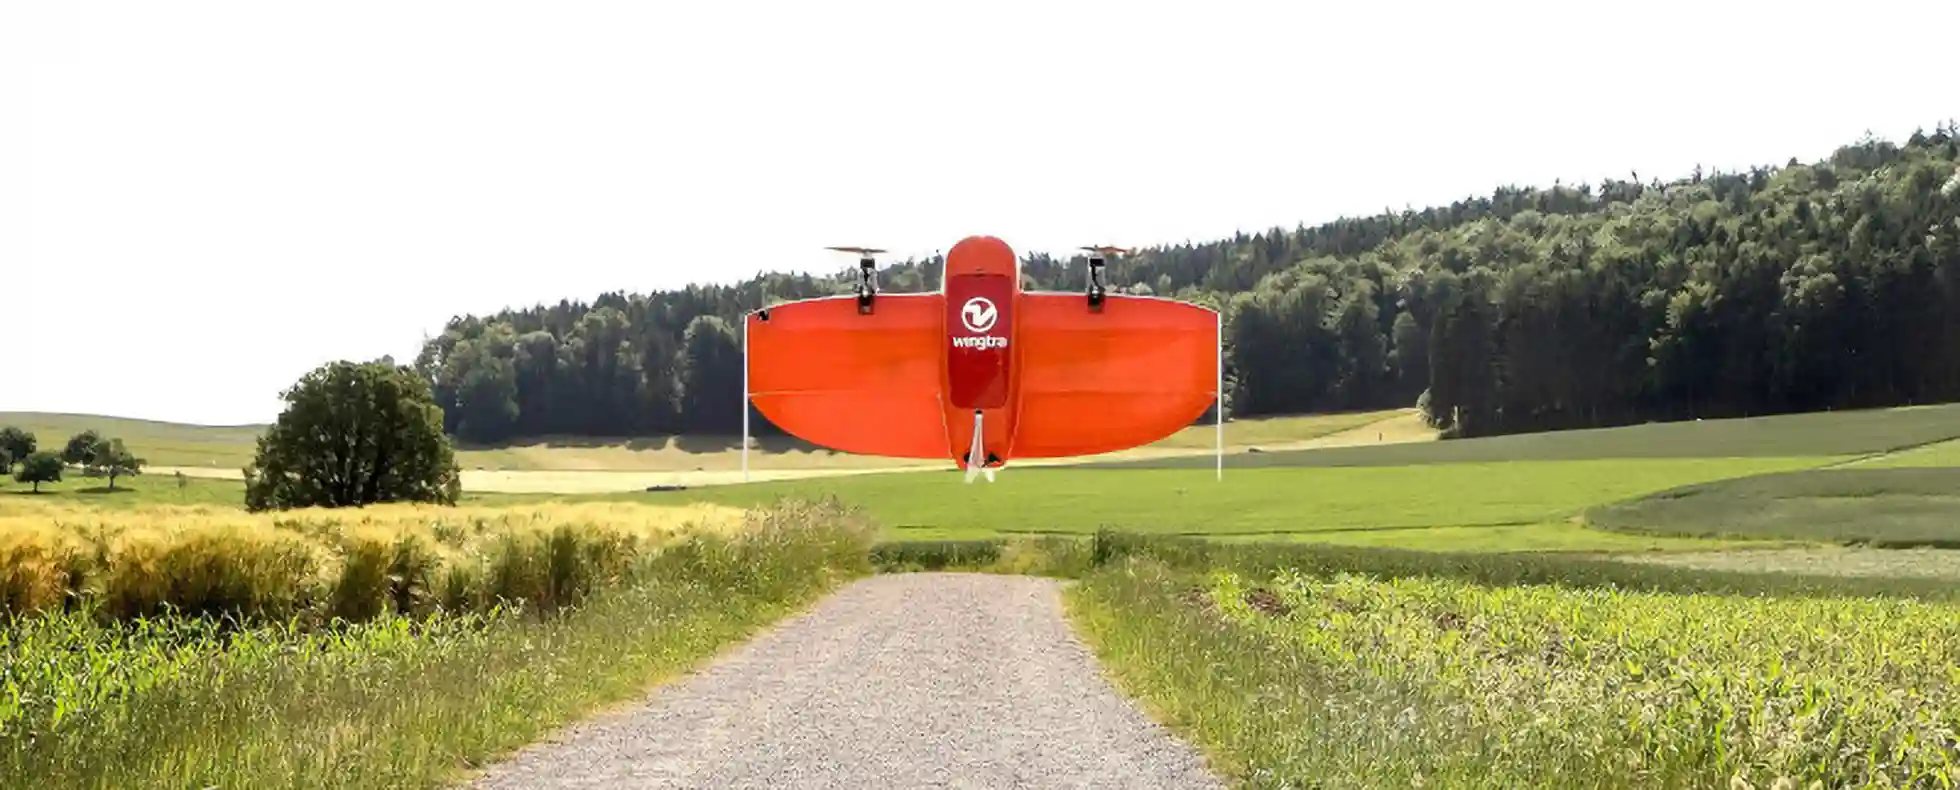 Fixed Wing Drone vs. Rotary Drone: 7 Key Differences Explained